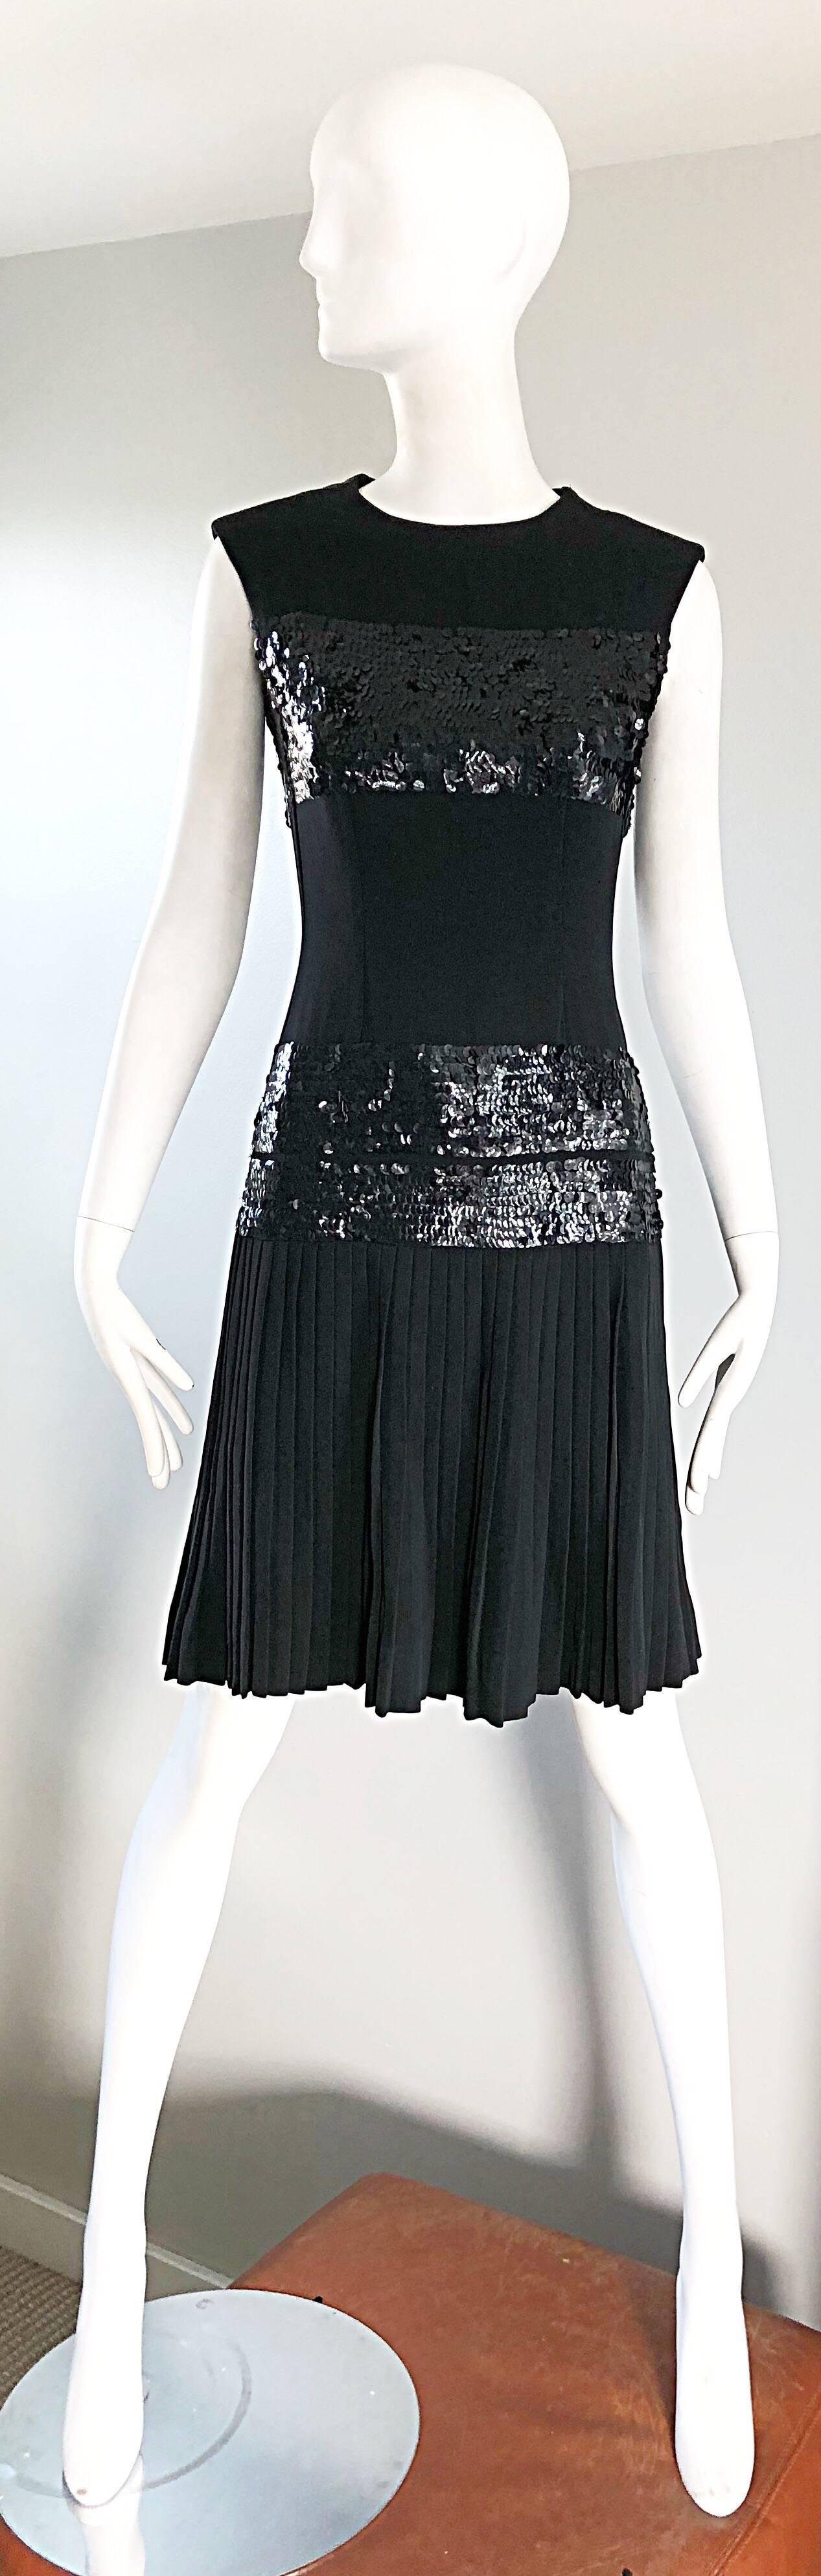 Beautiful chic black crepe 1960s sequined shift dres! Features hundreds of black sequins on the bodice and waist. Fitted bodice, with an accordion skirt that looks fantastic on! Full metal zipper up the back with hook-and-eye closure. The perfect